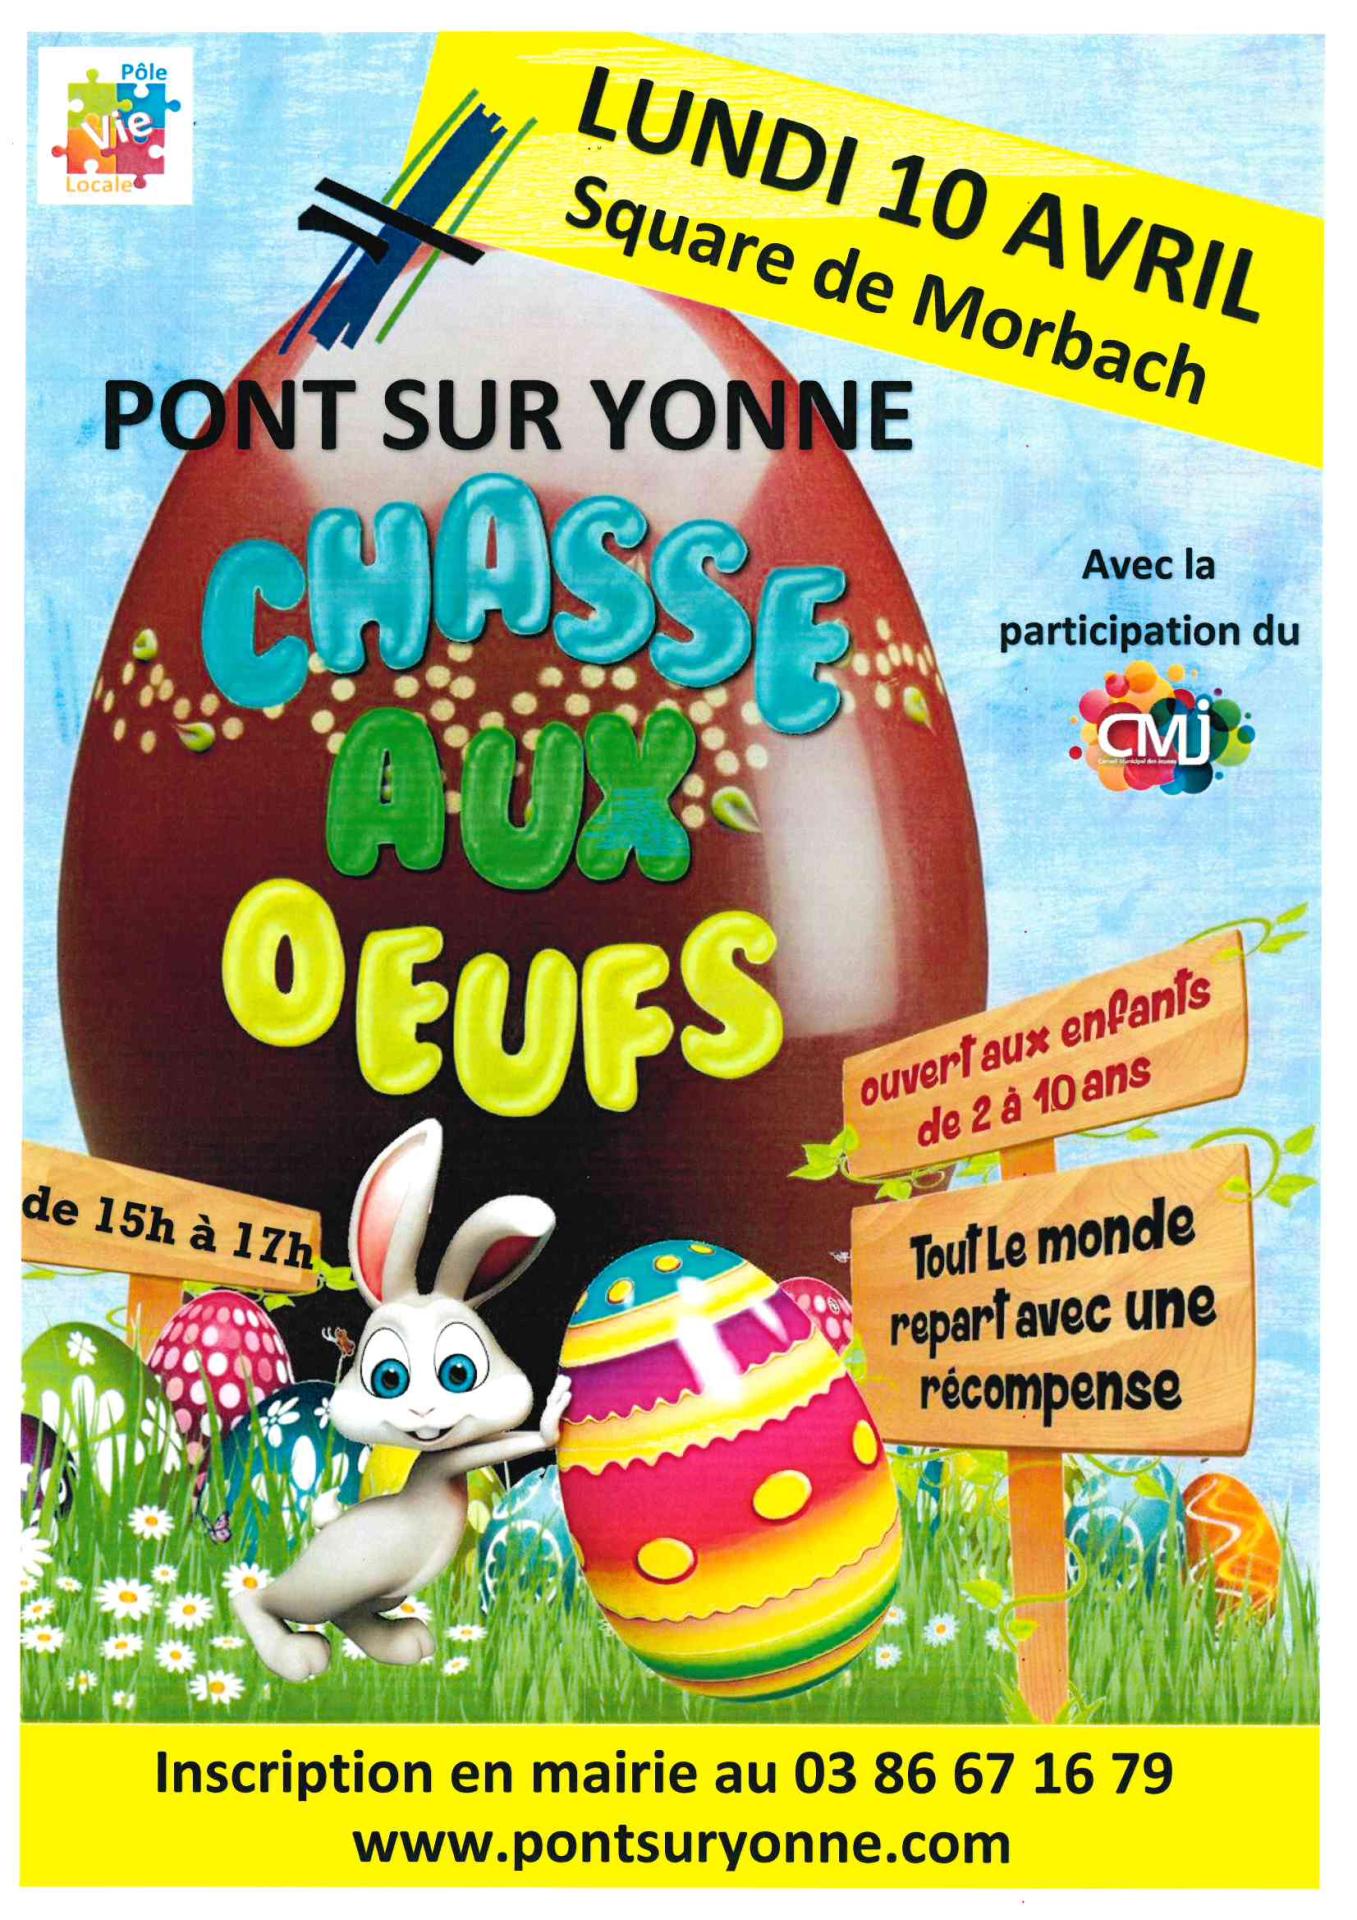 chasse aux oeufs